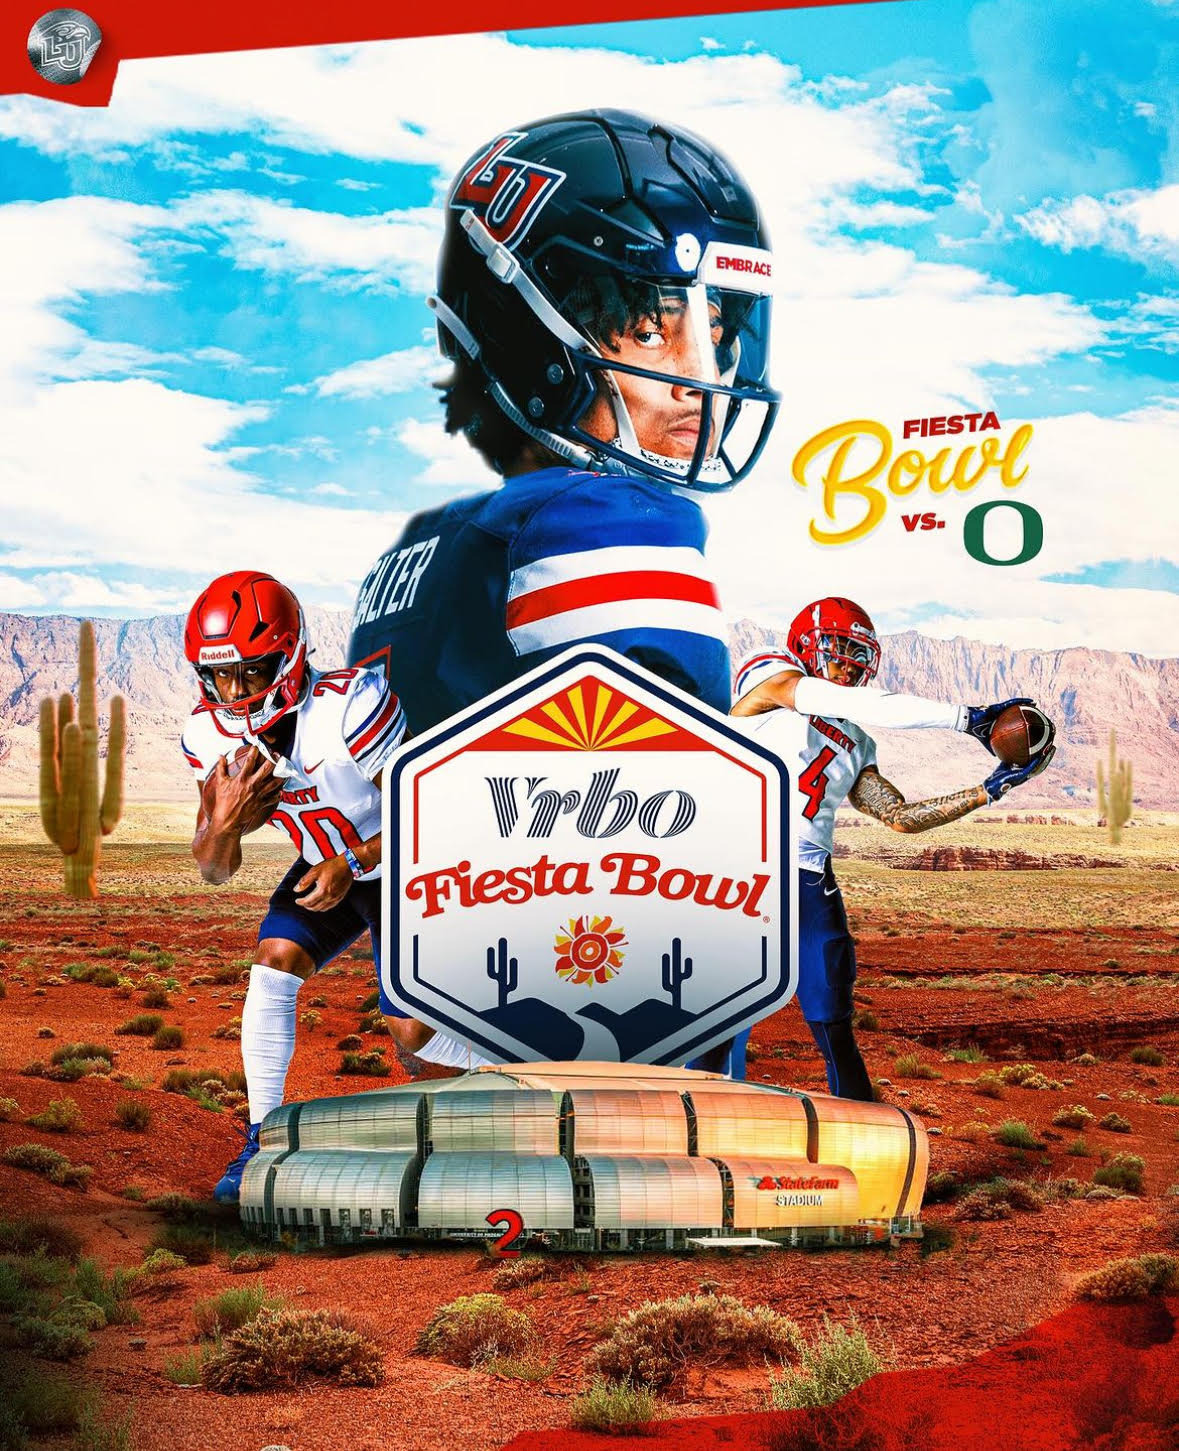 Liberty, University of Oregon to partner for service project ahead of Vrbo Fiesta Bowl